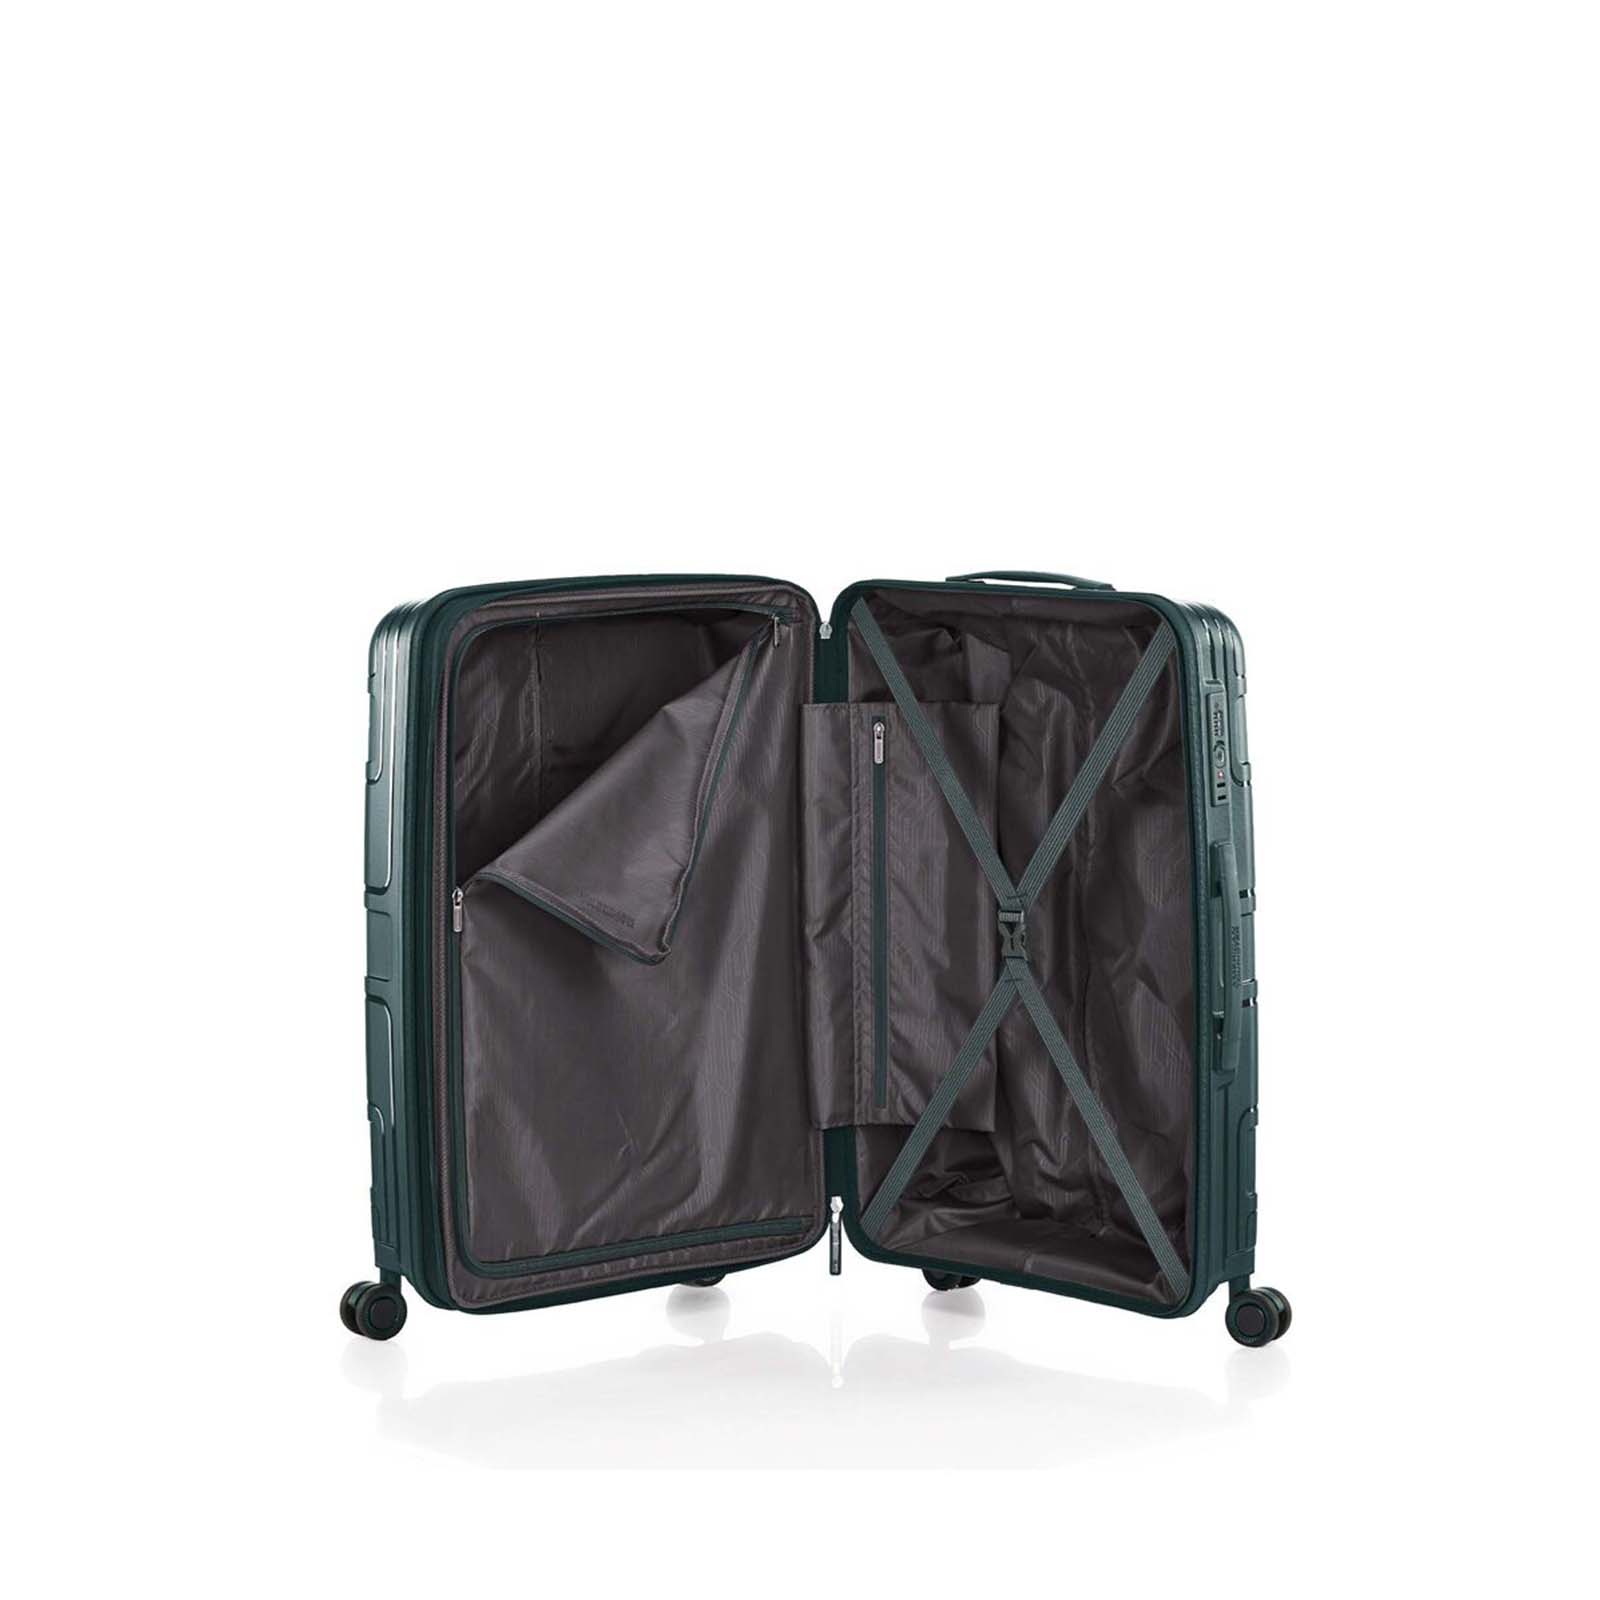 American-Tourister-Light-Max-69cm-Suitcase-Varsity-Green-Open